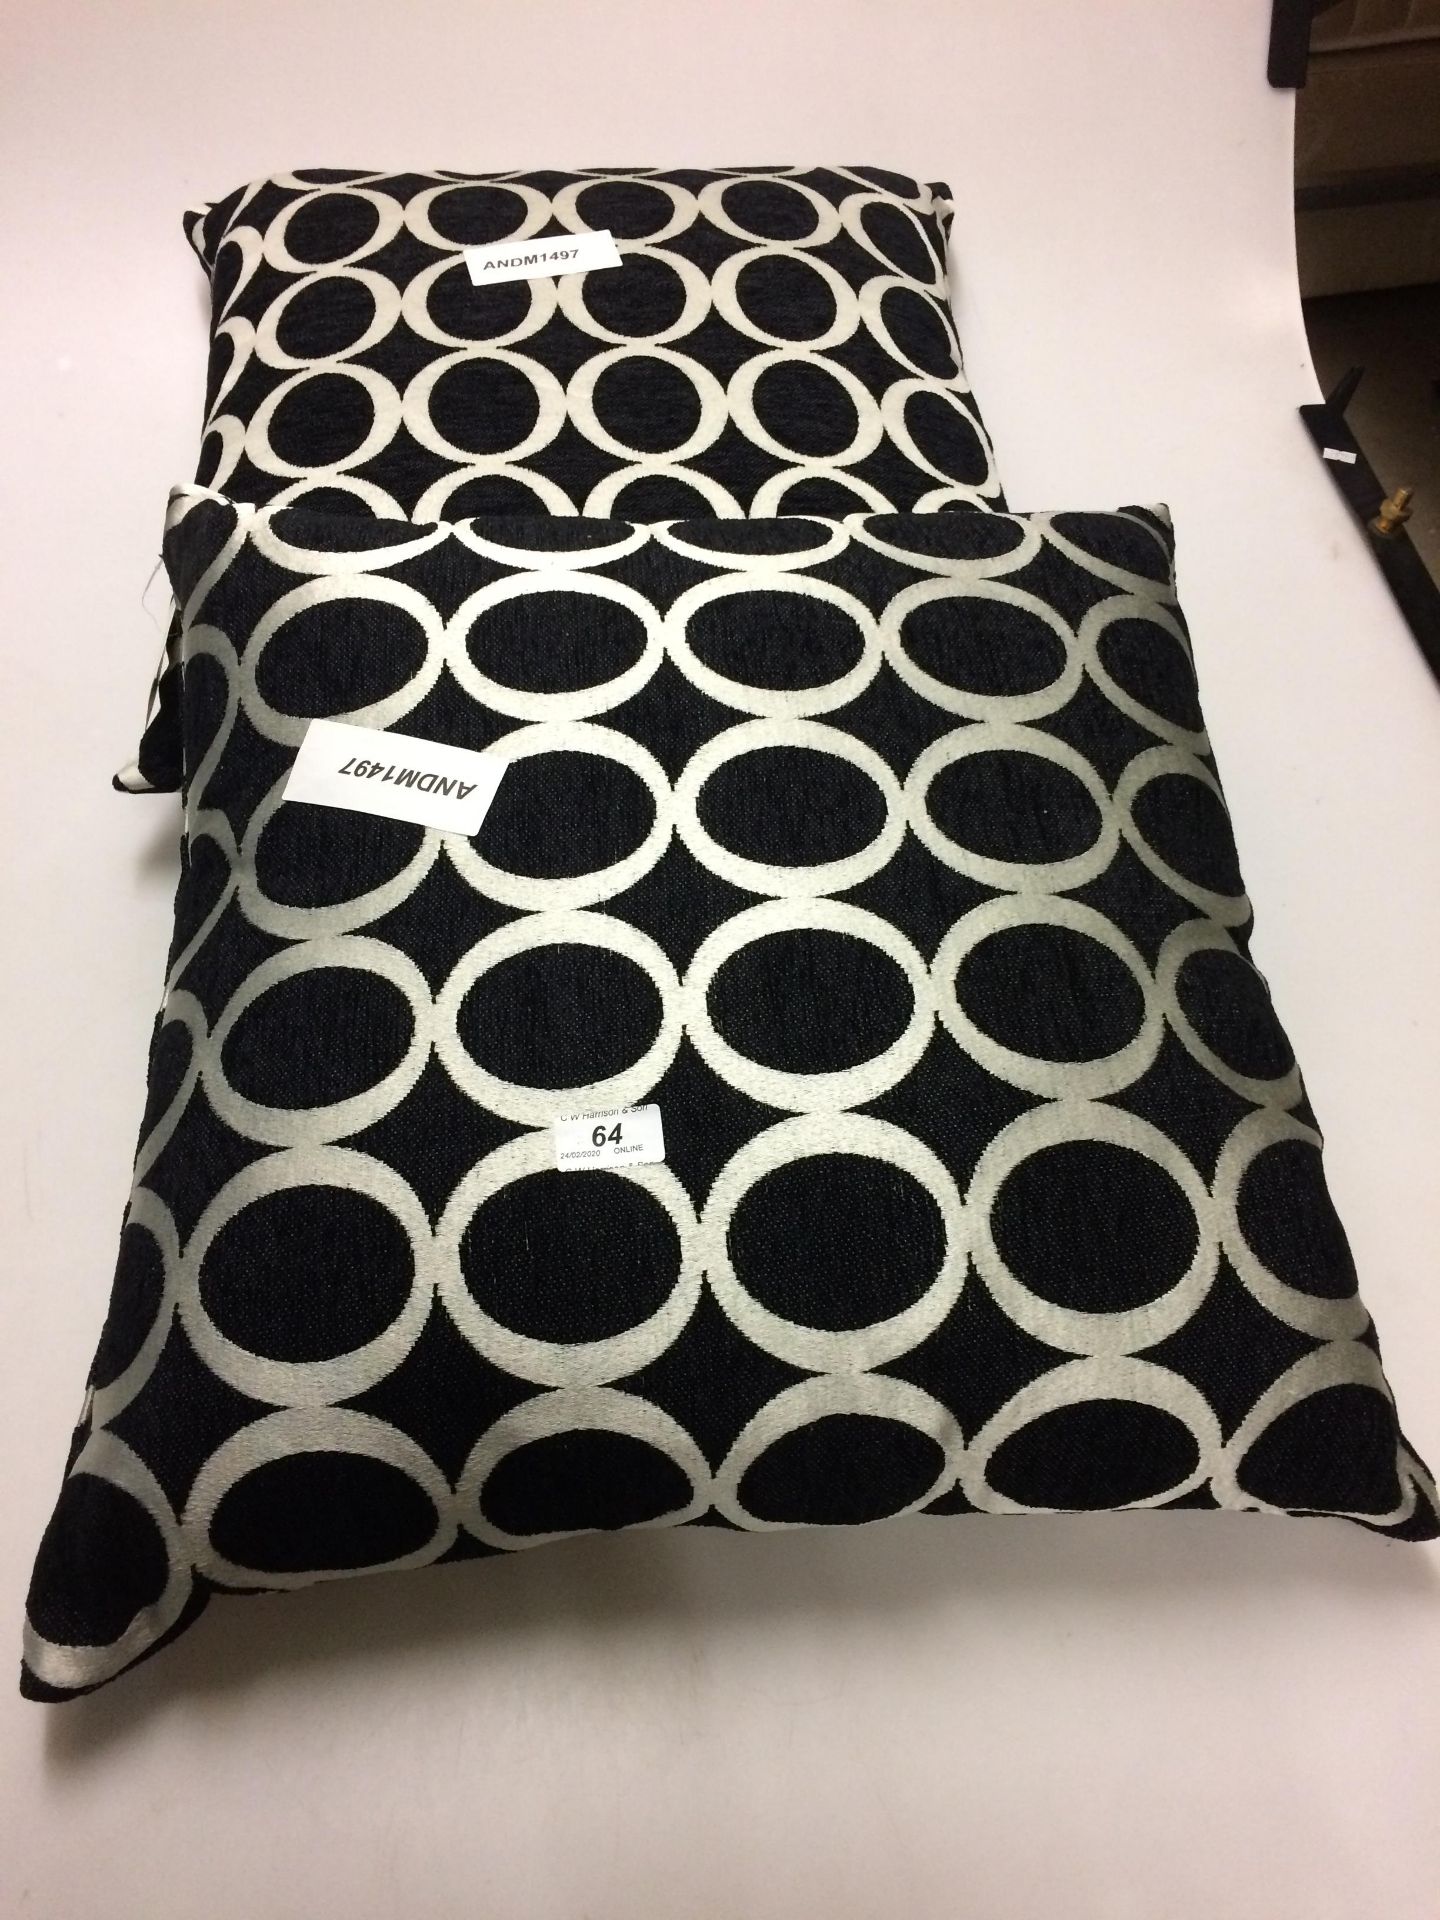 2 x Oh Scatter Cushions by Andover Mills - Image 2 of 2